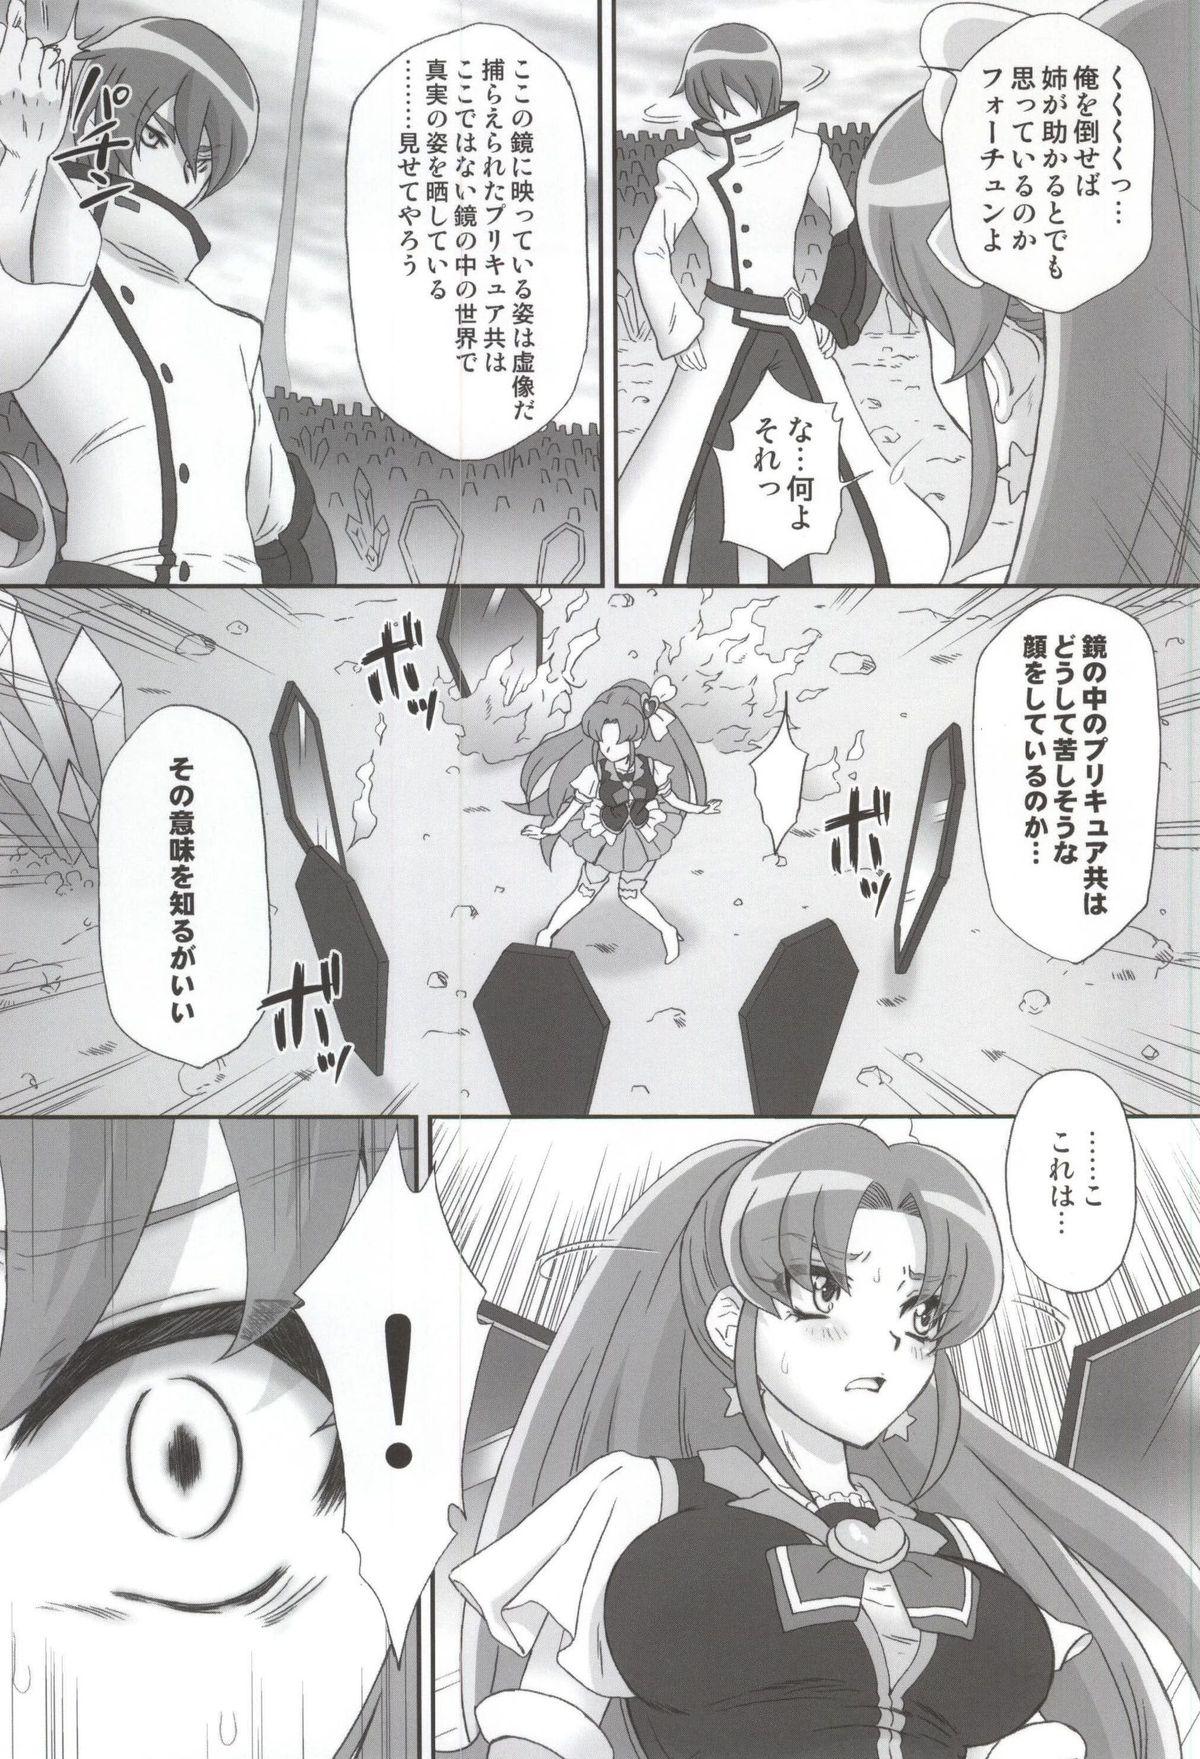 Bitch BAD END OF FORTUNE - Happinesscharge precure Arabe - Page 6